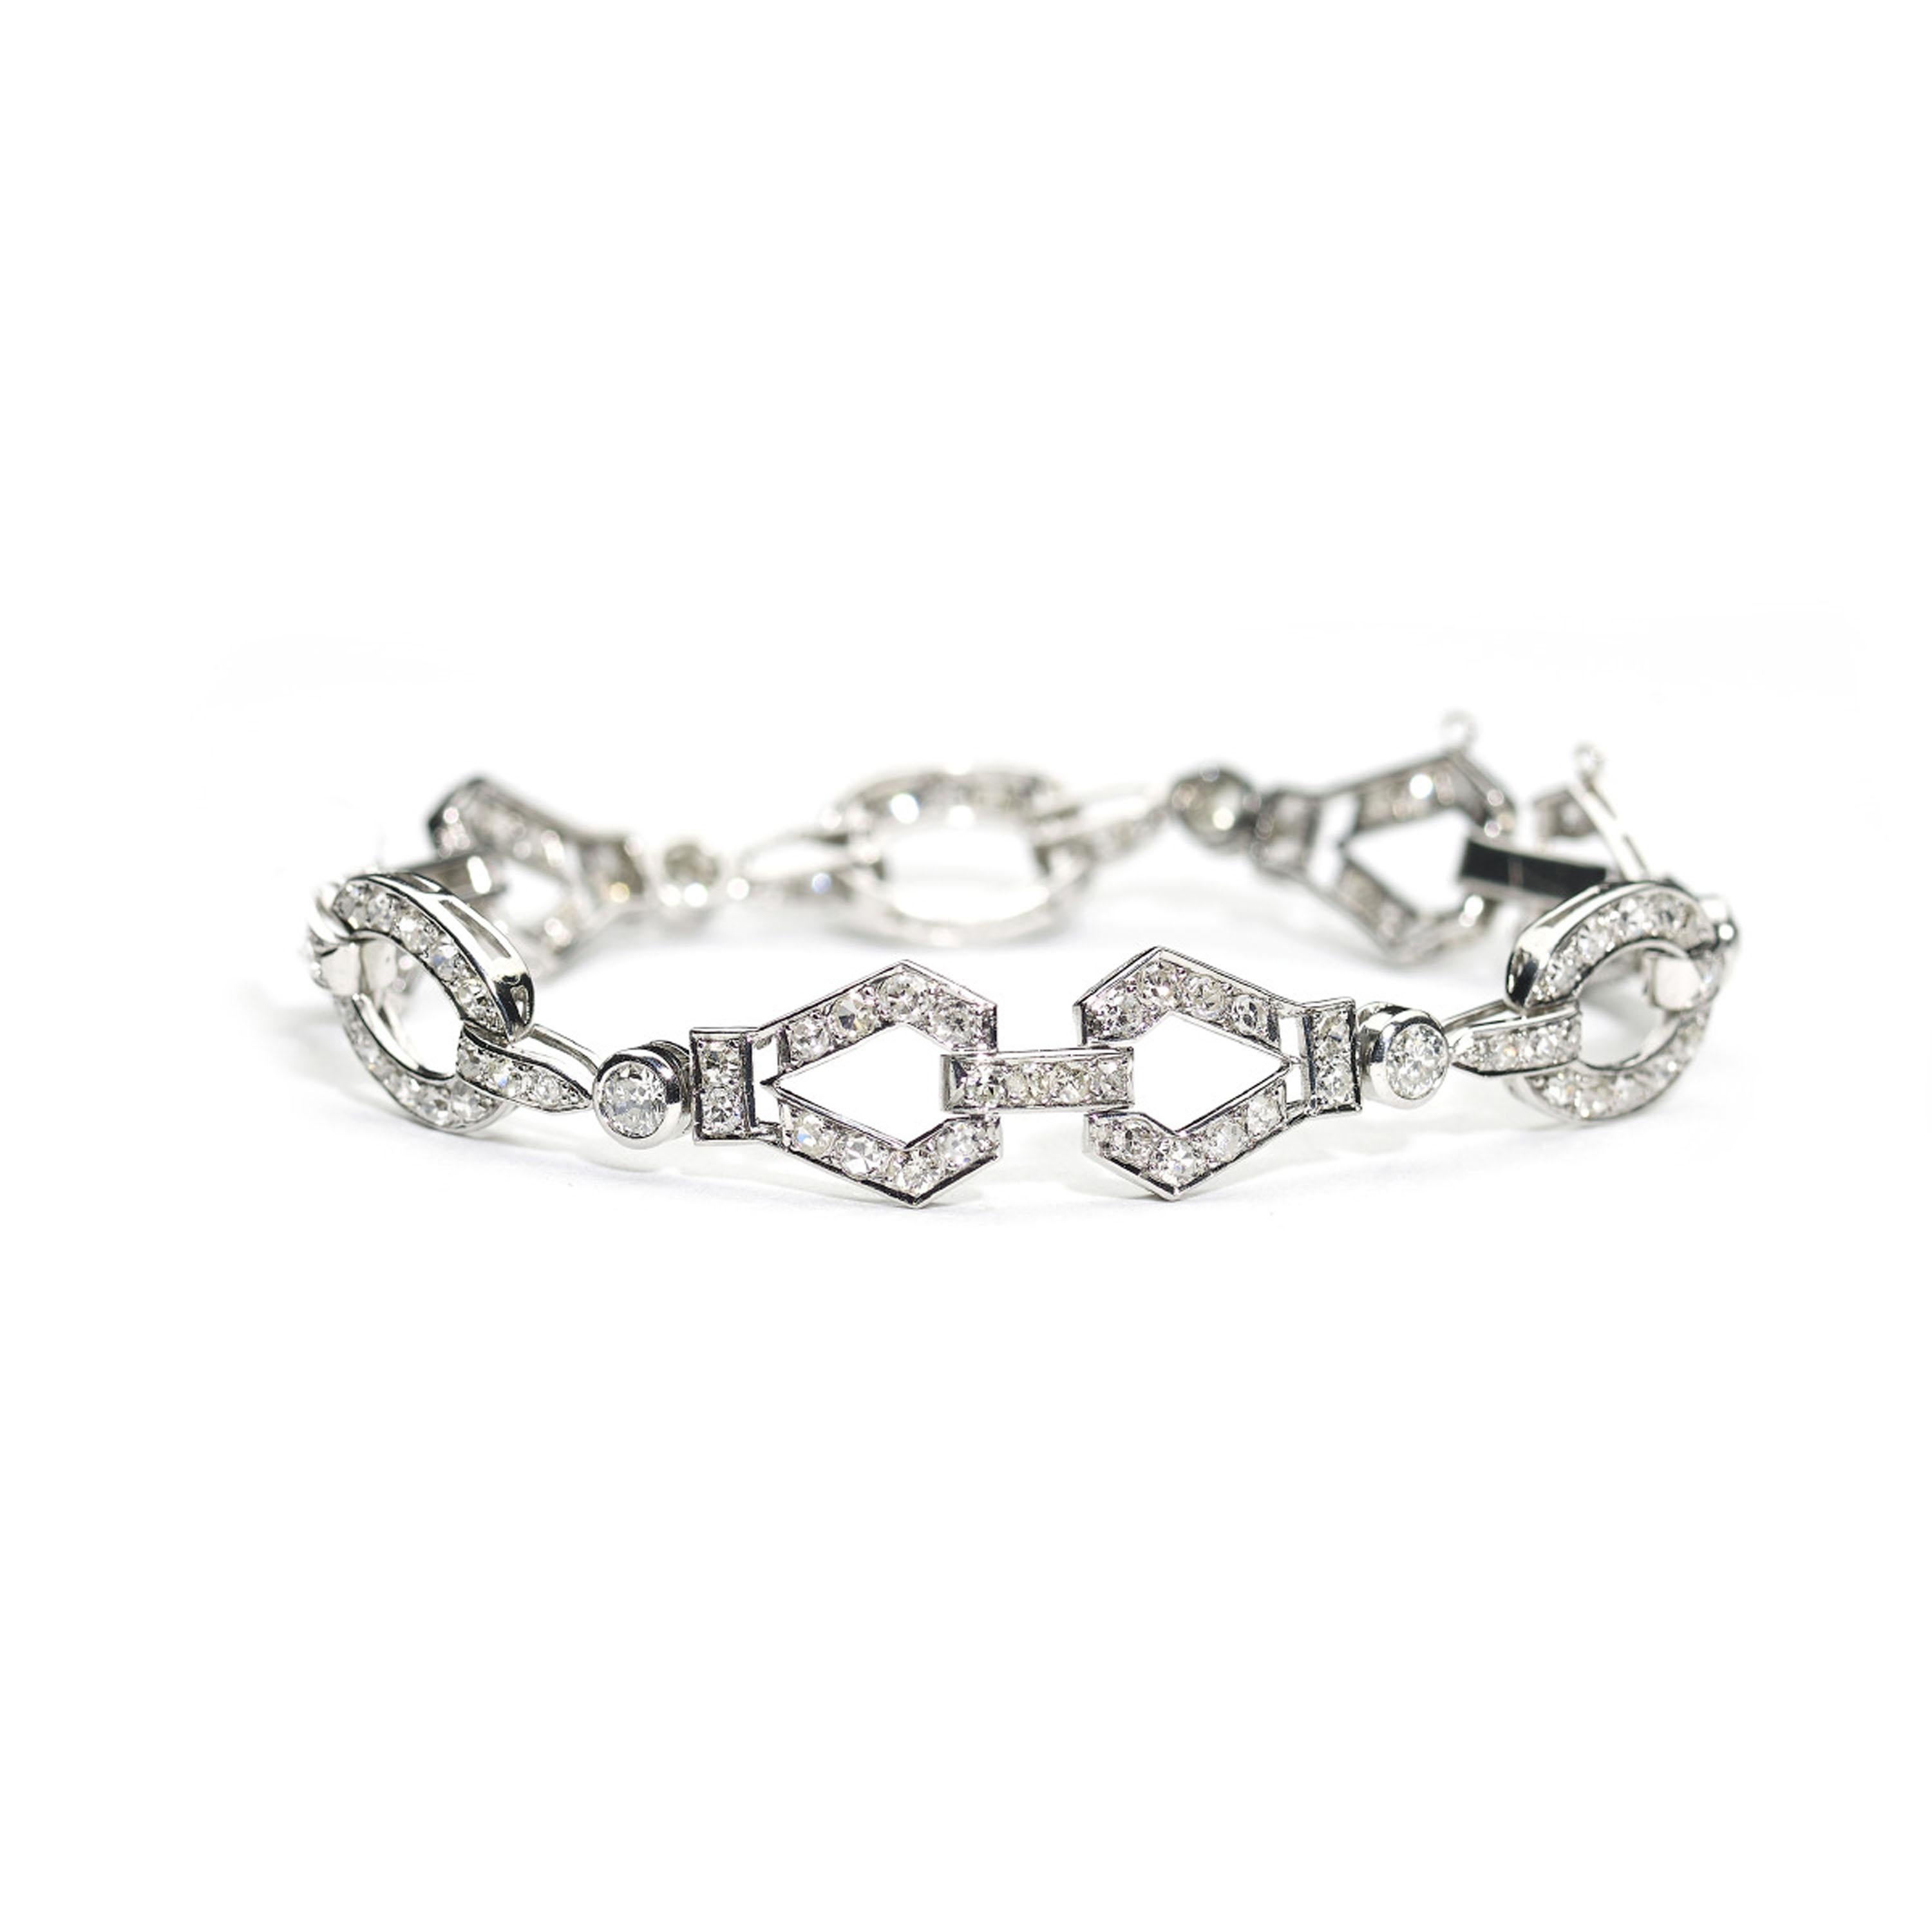 A French, Art Deco diamond bracelet, with a geometric design, set with round brilliant-cut and eight-cut diamonds, mounted in platinum, with French dog's head marks for platinum, with a white gold clasp, circa 1930. Estimated total diamond weight